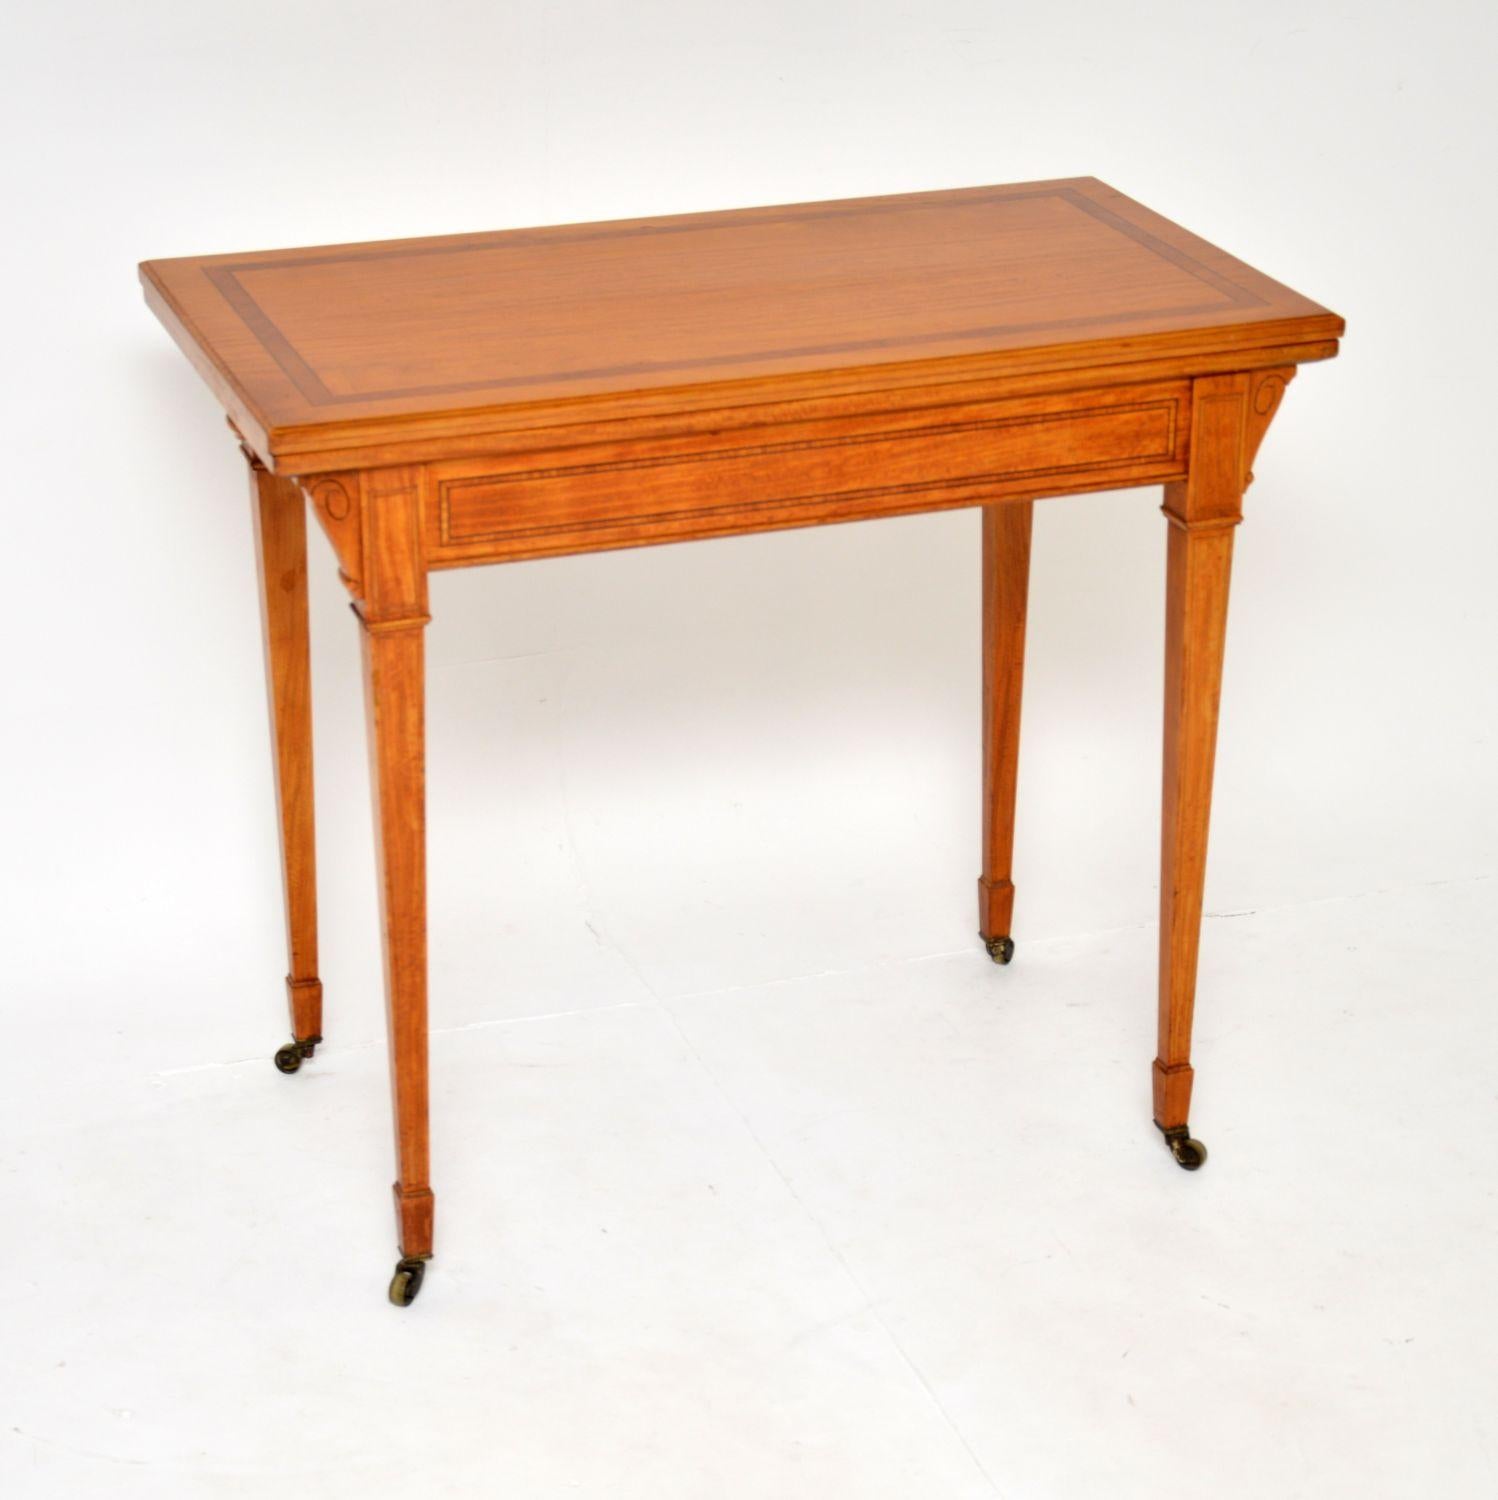 A wonderful antique Edwardian card table, beautifully made from satin wood. This was made in England, it dates from around 1900-1910.

The quality is excellent, this is very well made and has a very elegant design. The satin wood has stunning colour